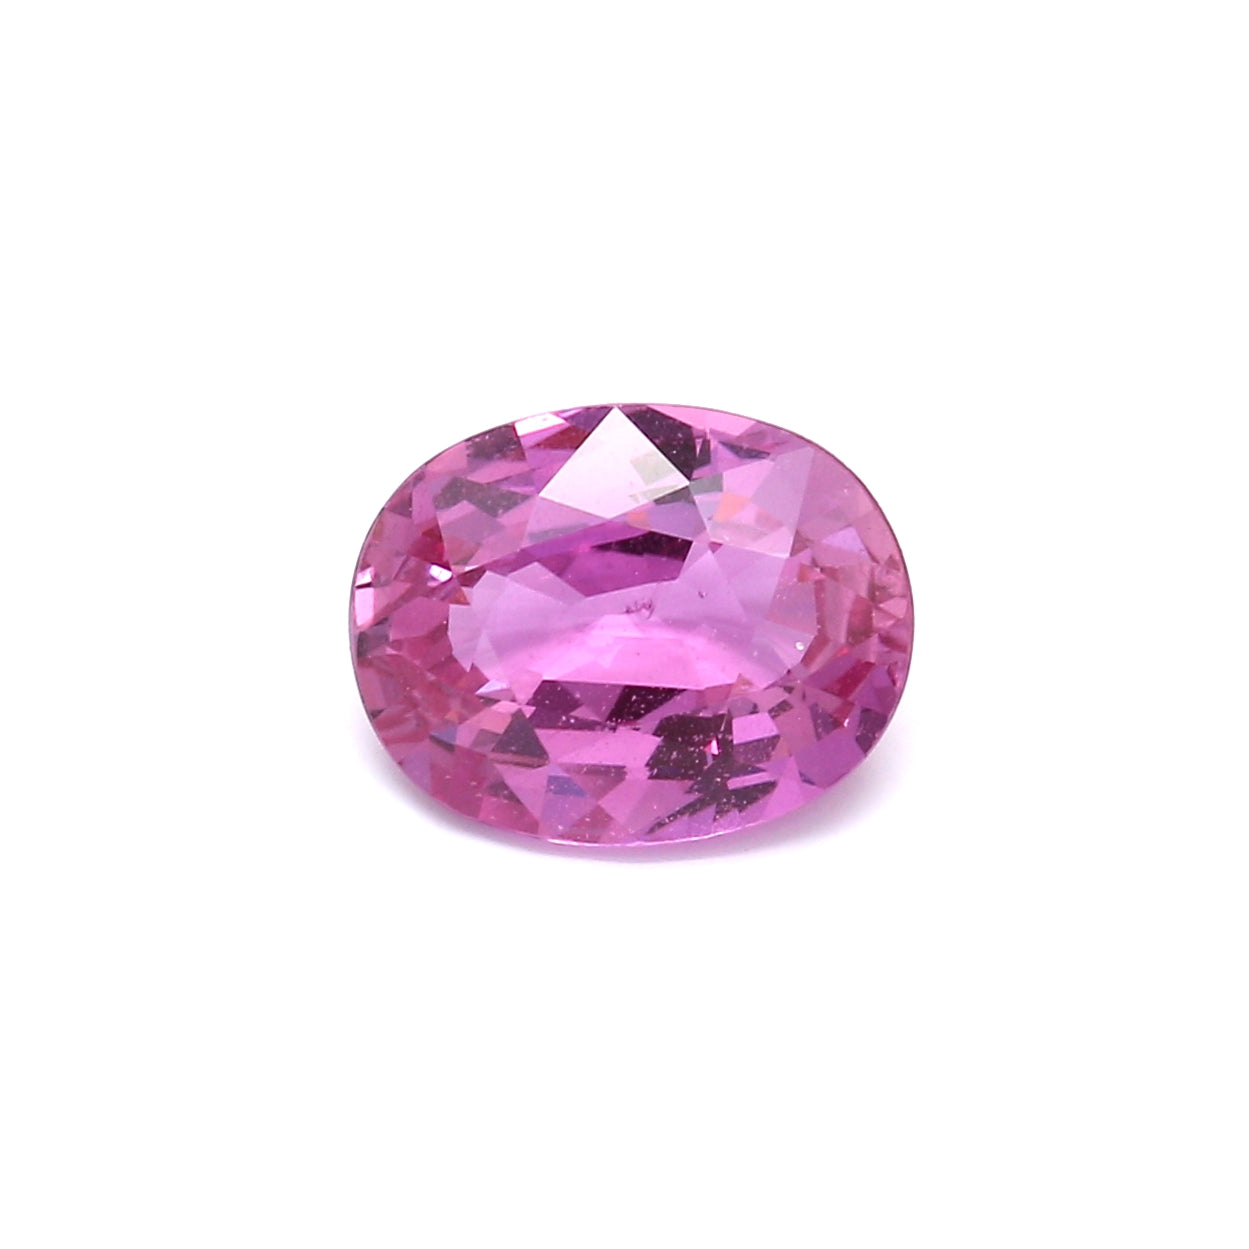 2.94ct Pink, Oval Sapphire, Heated, Thailand - 9.97 x 7.79 x 4.44mm